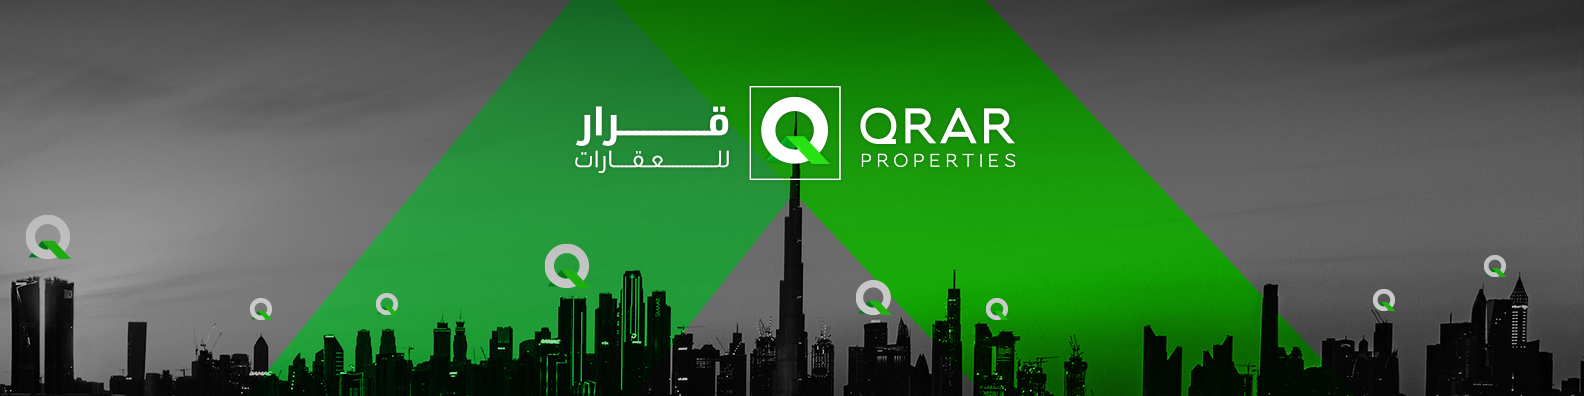 New Homes & New Construction Projects For Sale in  Abu Dhabi | QRAR Properties Abu Dhabi